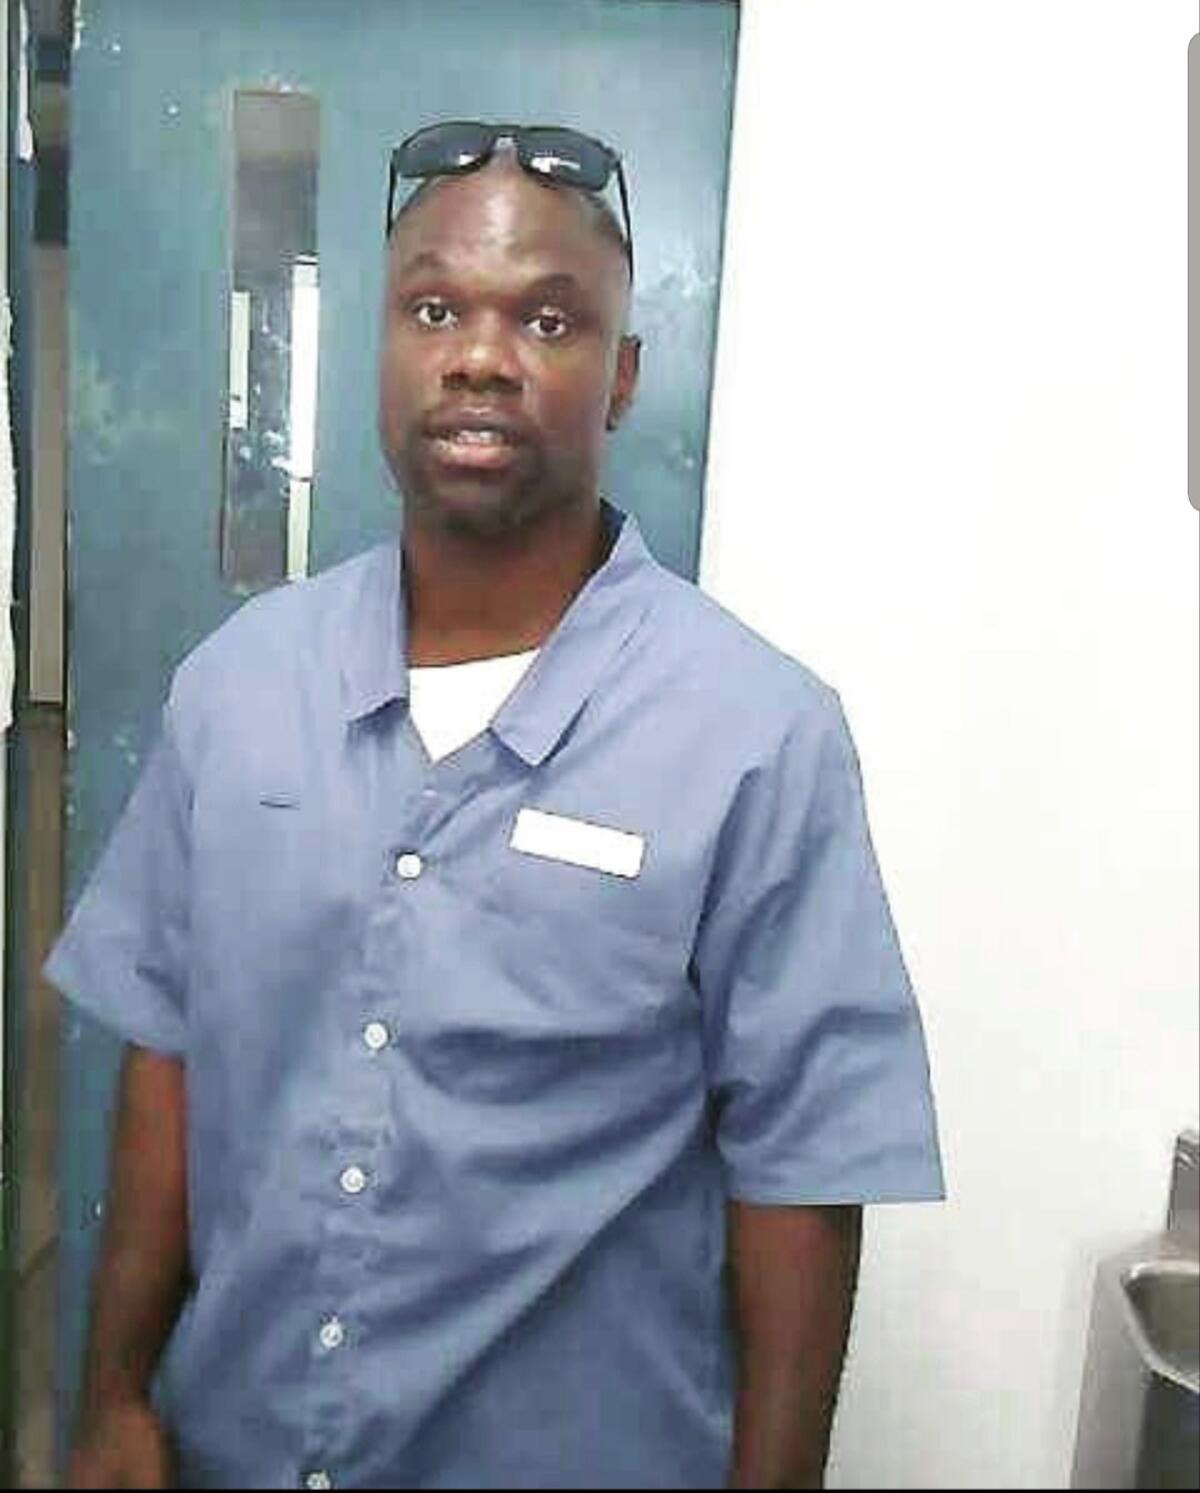 Ian Manuel at Dade Correctional Institution in 2016, a few months before his release. Age 39.